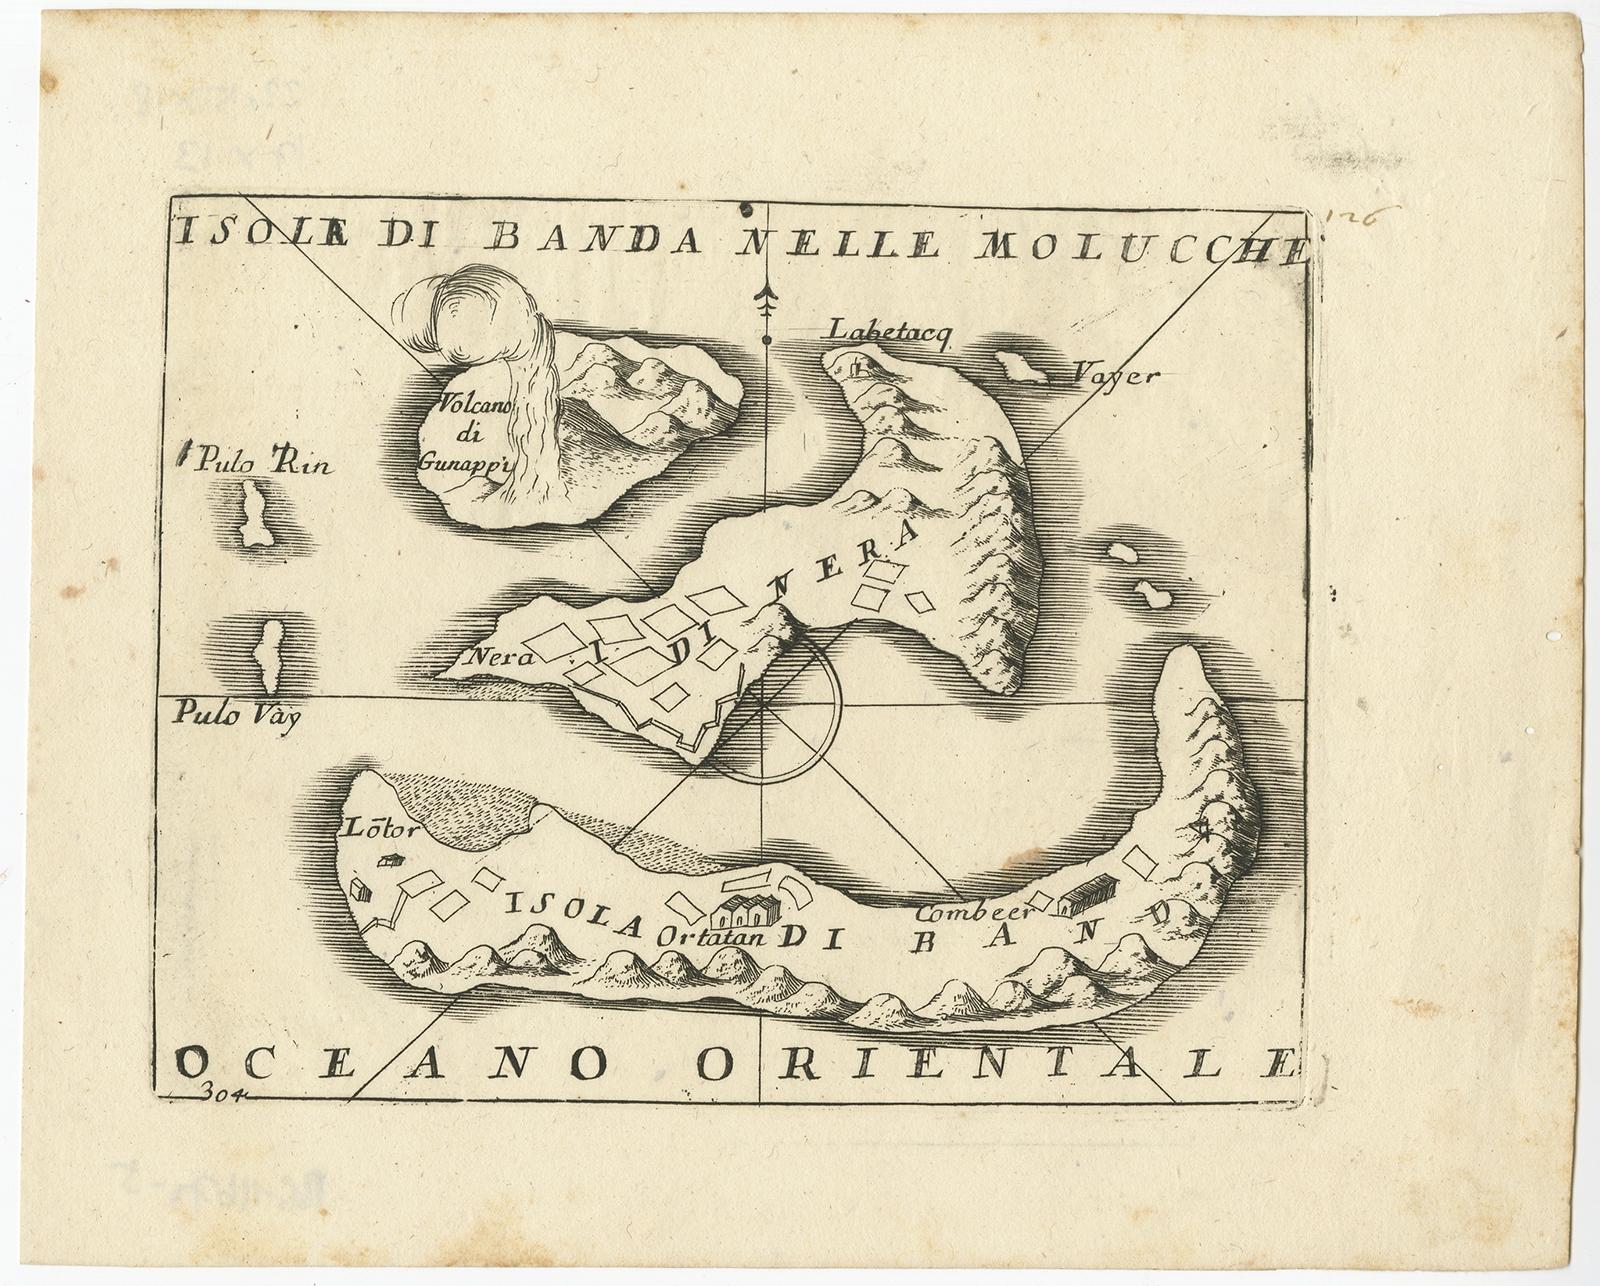 Antique map titled 'Isole di Banda Nelle Molucche'. 

Small old map depicting the Banda Islands, Indonesia. 

Artists and Engravers: Published by V.M. Coronelli in Venice, 1706.